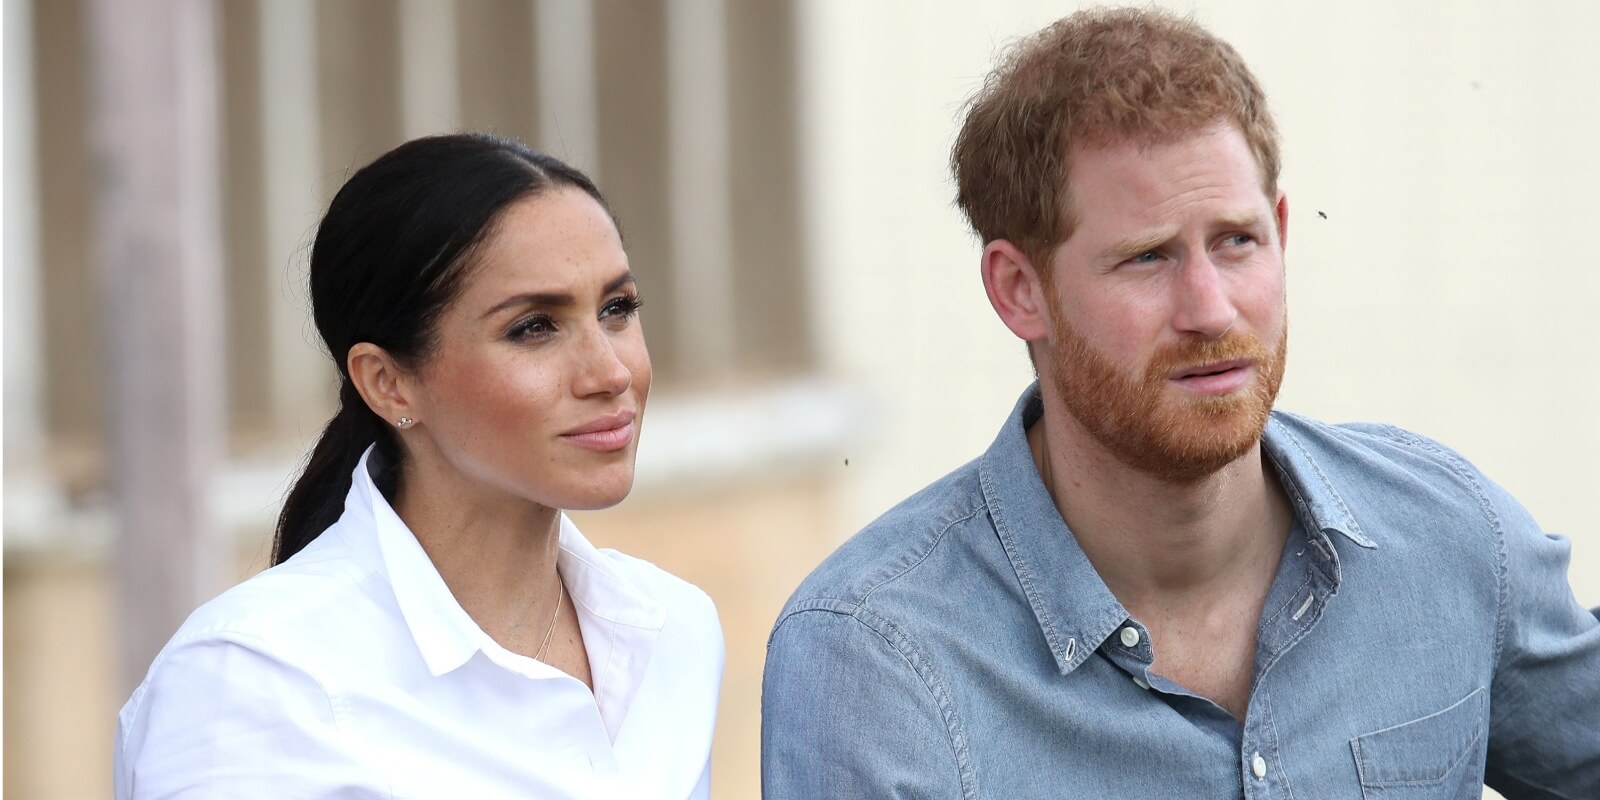 Meghan Markle and Prince Harry are photographed visiting a local farming family, the Woodleys, on October 17, 2018 in Dubbo, Australia.